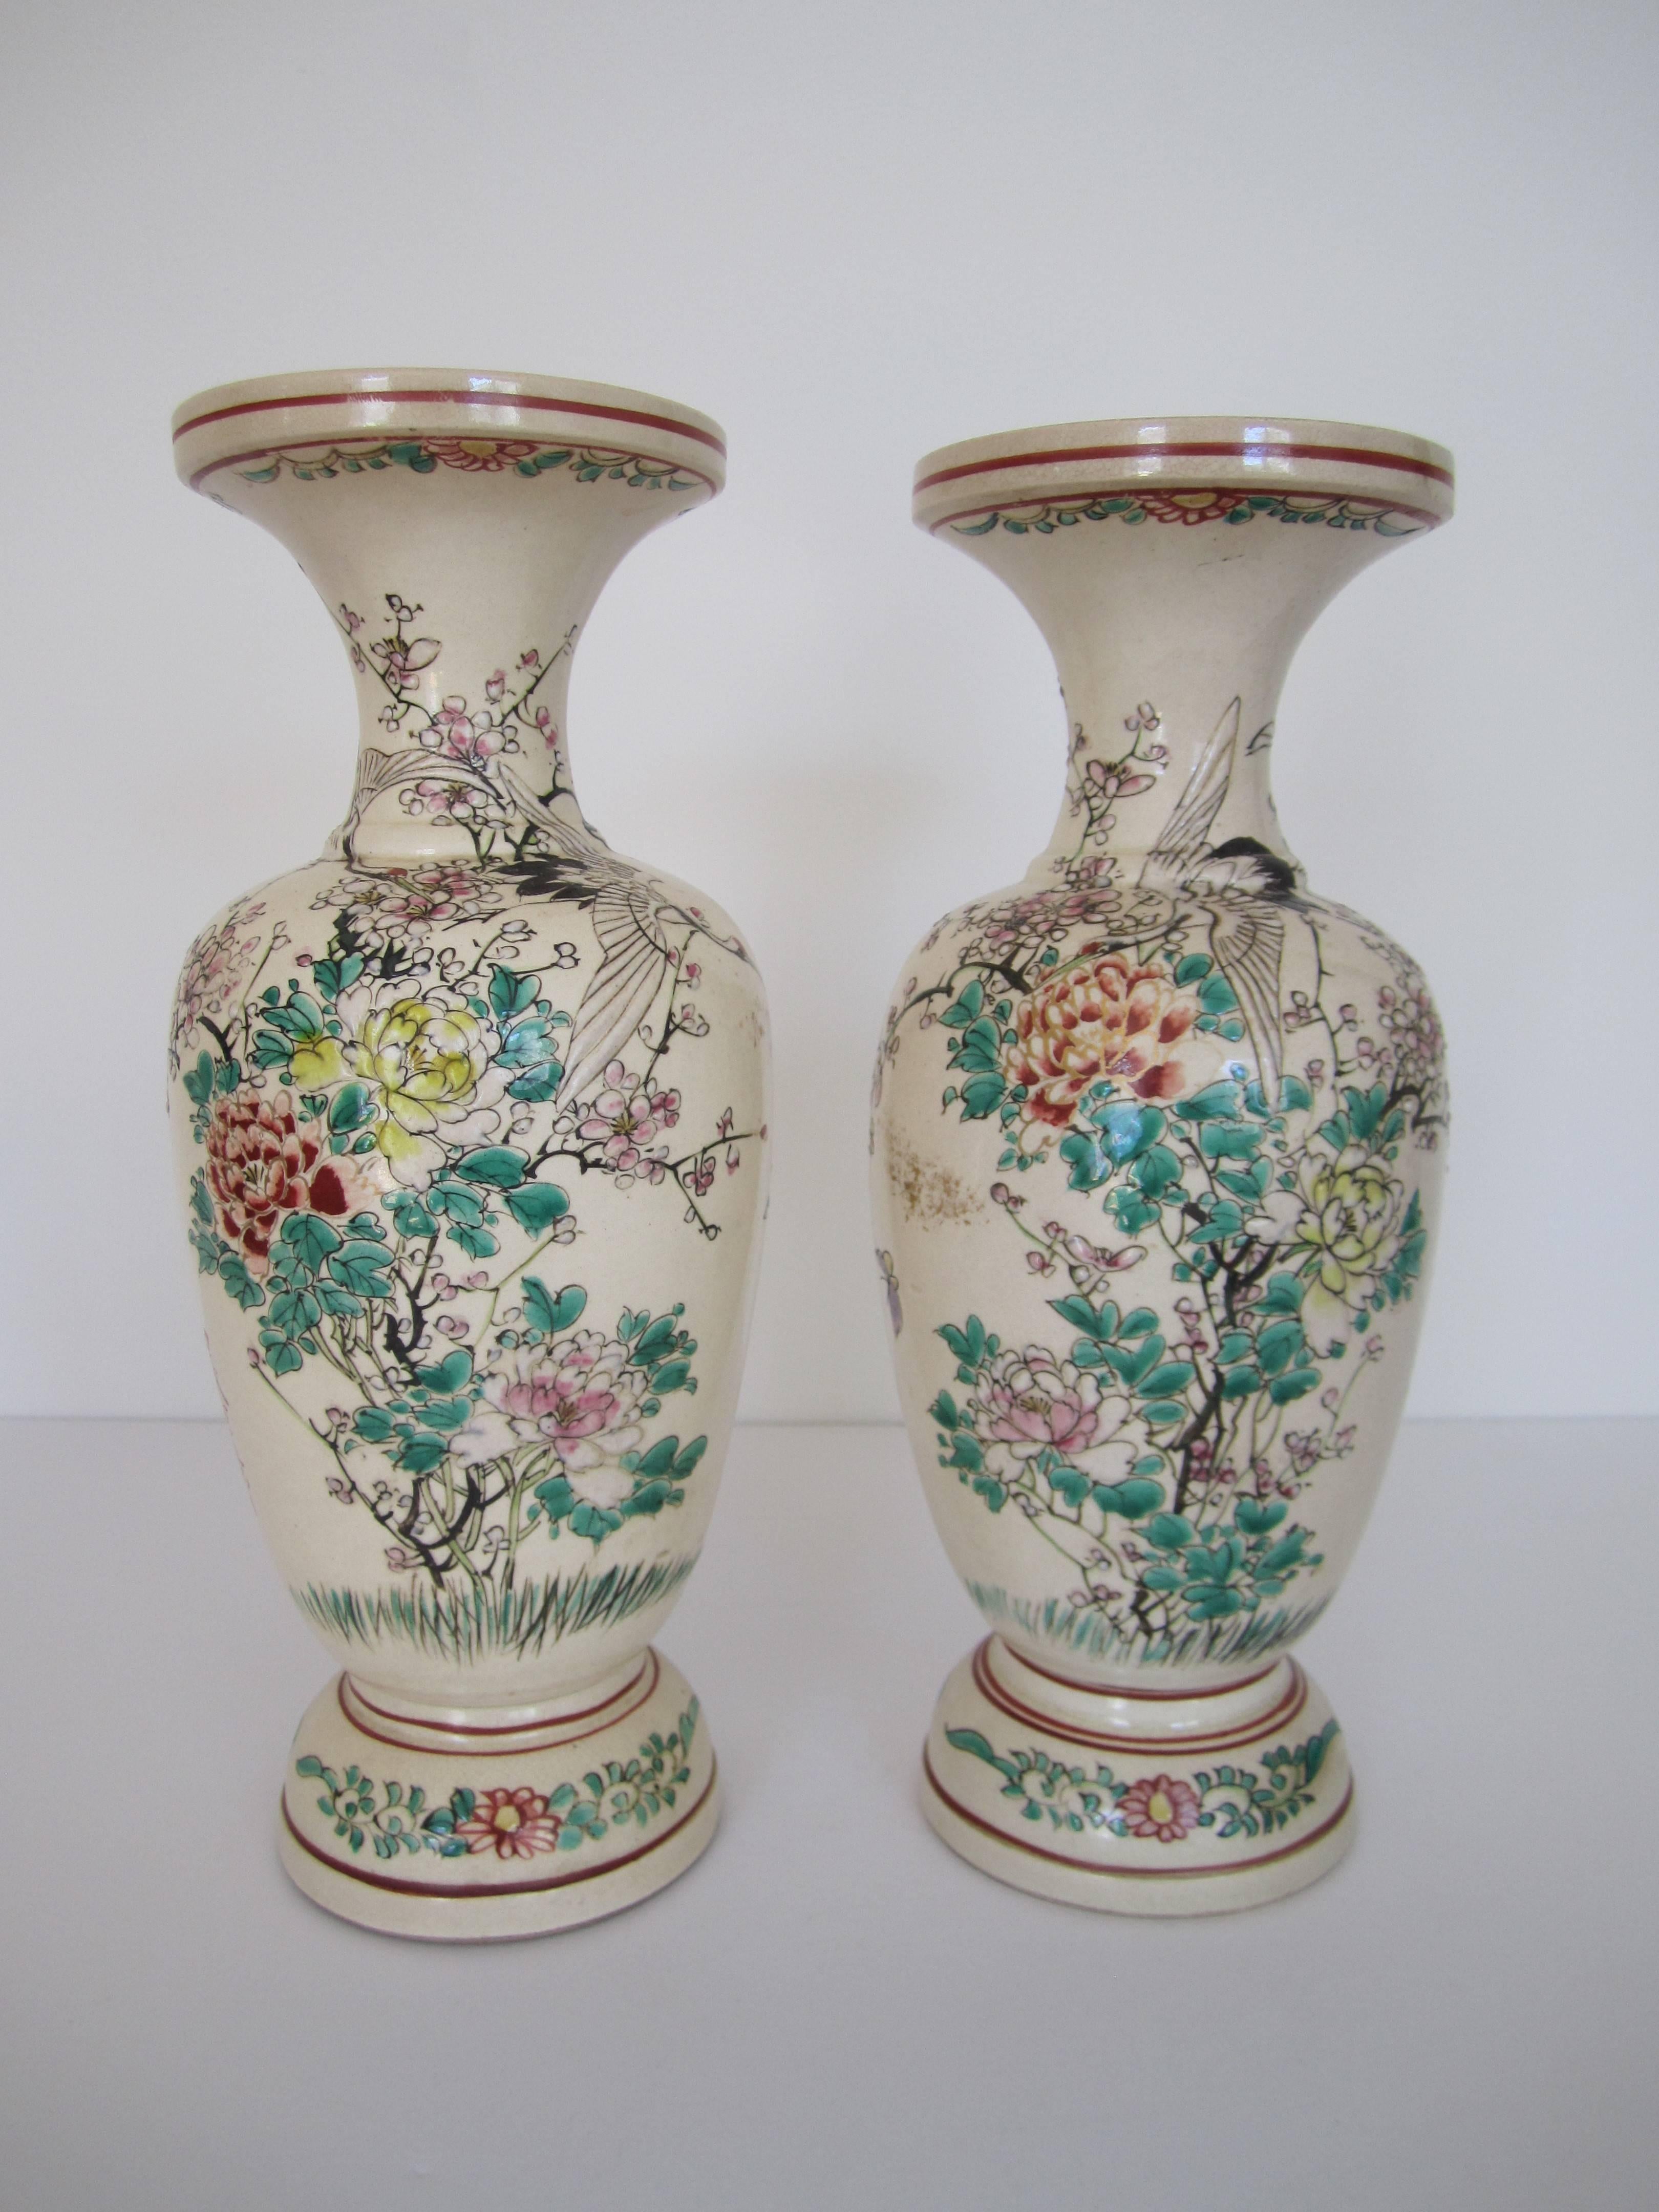 A beautiful pair of Japanese earthenware 'bisque' colored vases with a raised floral, butterfly and 'phoenix' bird relief, circa mid-20th century, Japan. Both vases signed on side as shown in image #7. Colors include green, red, blue, black, pink